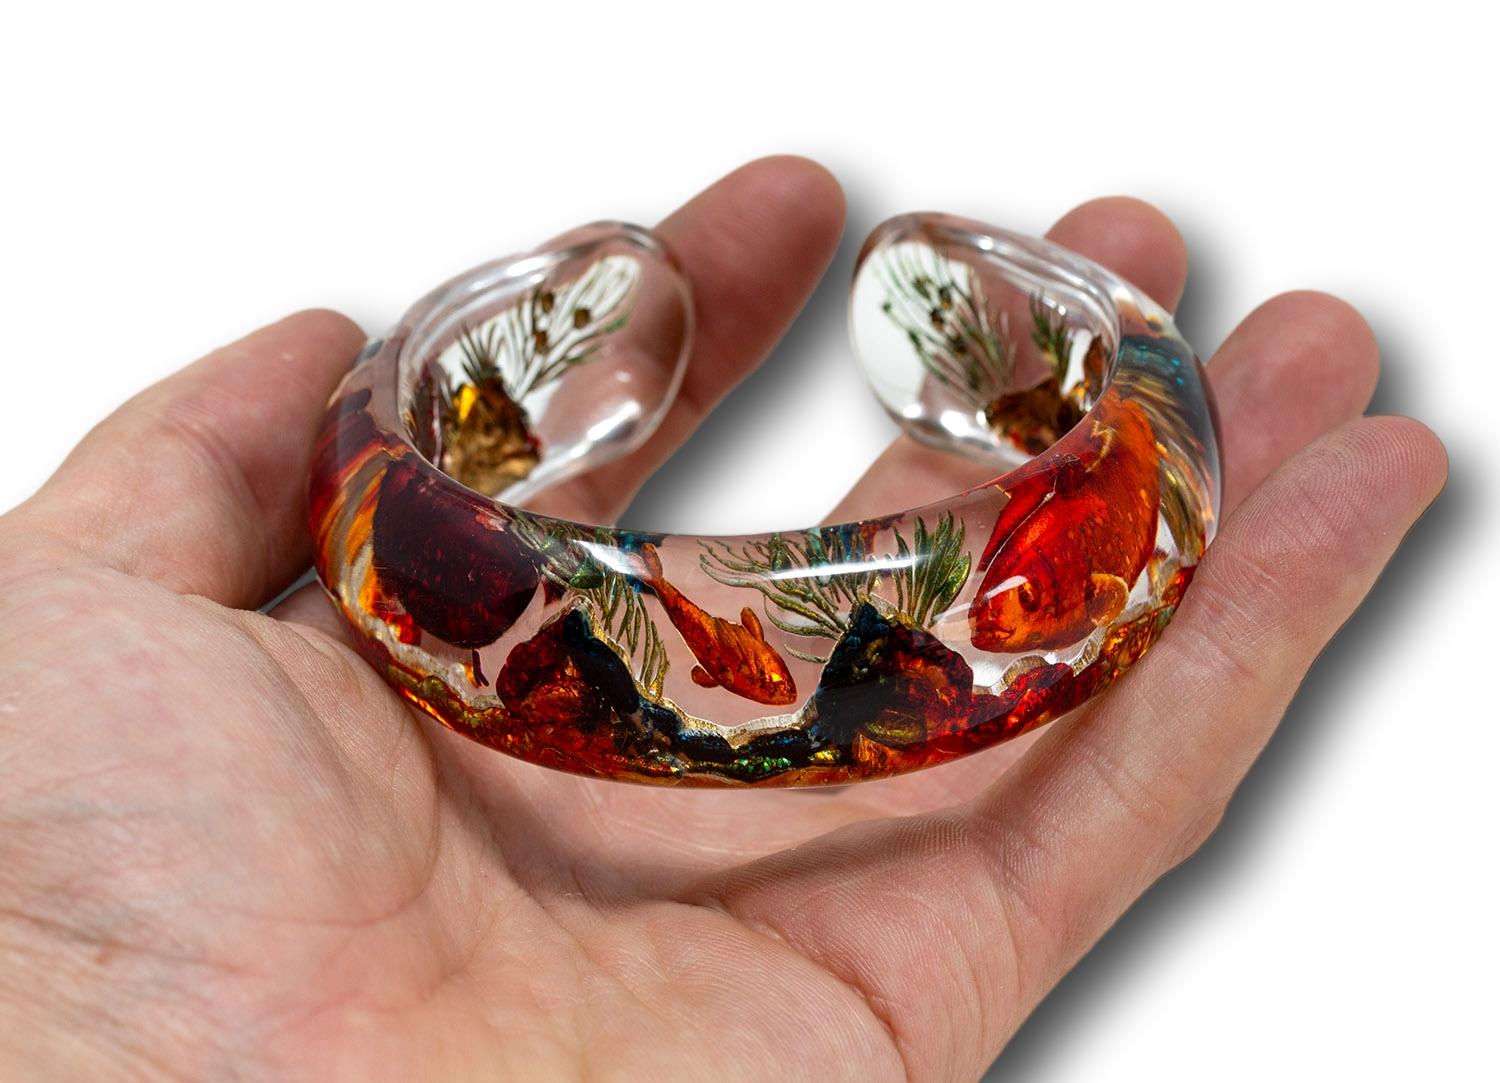 Matching the Dunhill Aquarium Lighter (His & Hers) 

The bangle formed in lucite features a reverse decorated central sea scape scene with fish amongst foliage and rock work in beautiful orange and golden colours giving it a striking vibrant